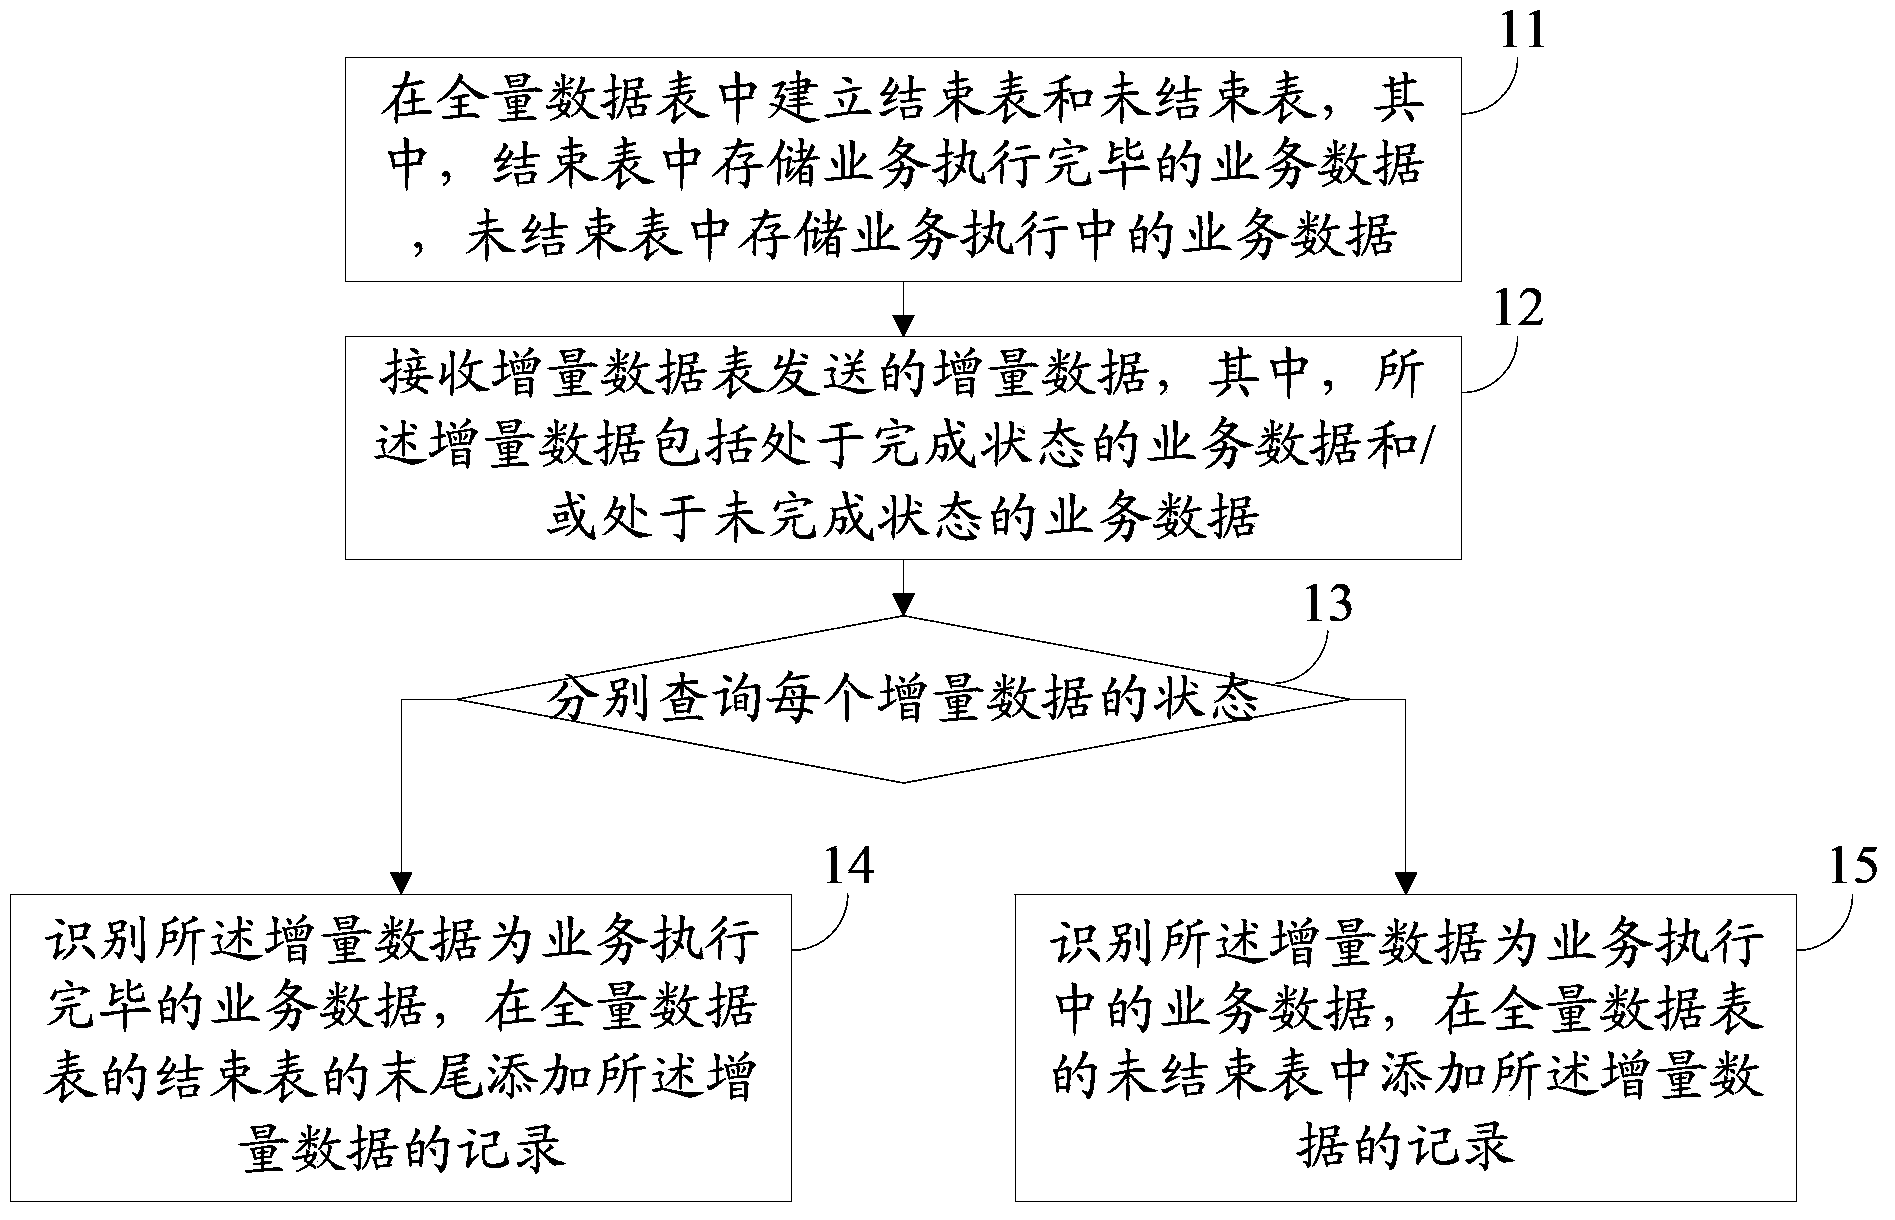 Method and system for updating database